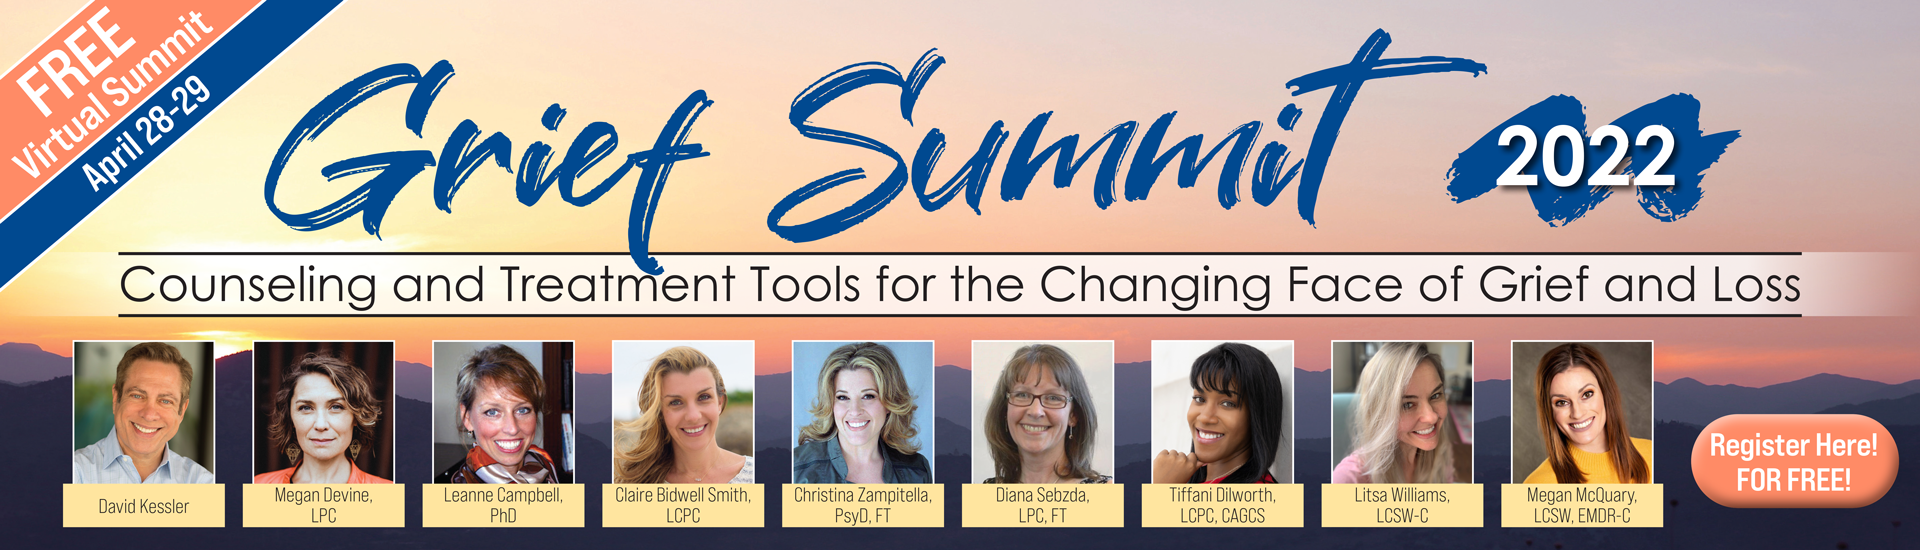 Grief Summit 2022: Counseling and Treatment Tools for the Changing Face of Grief and Loss